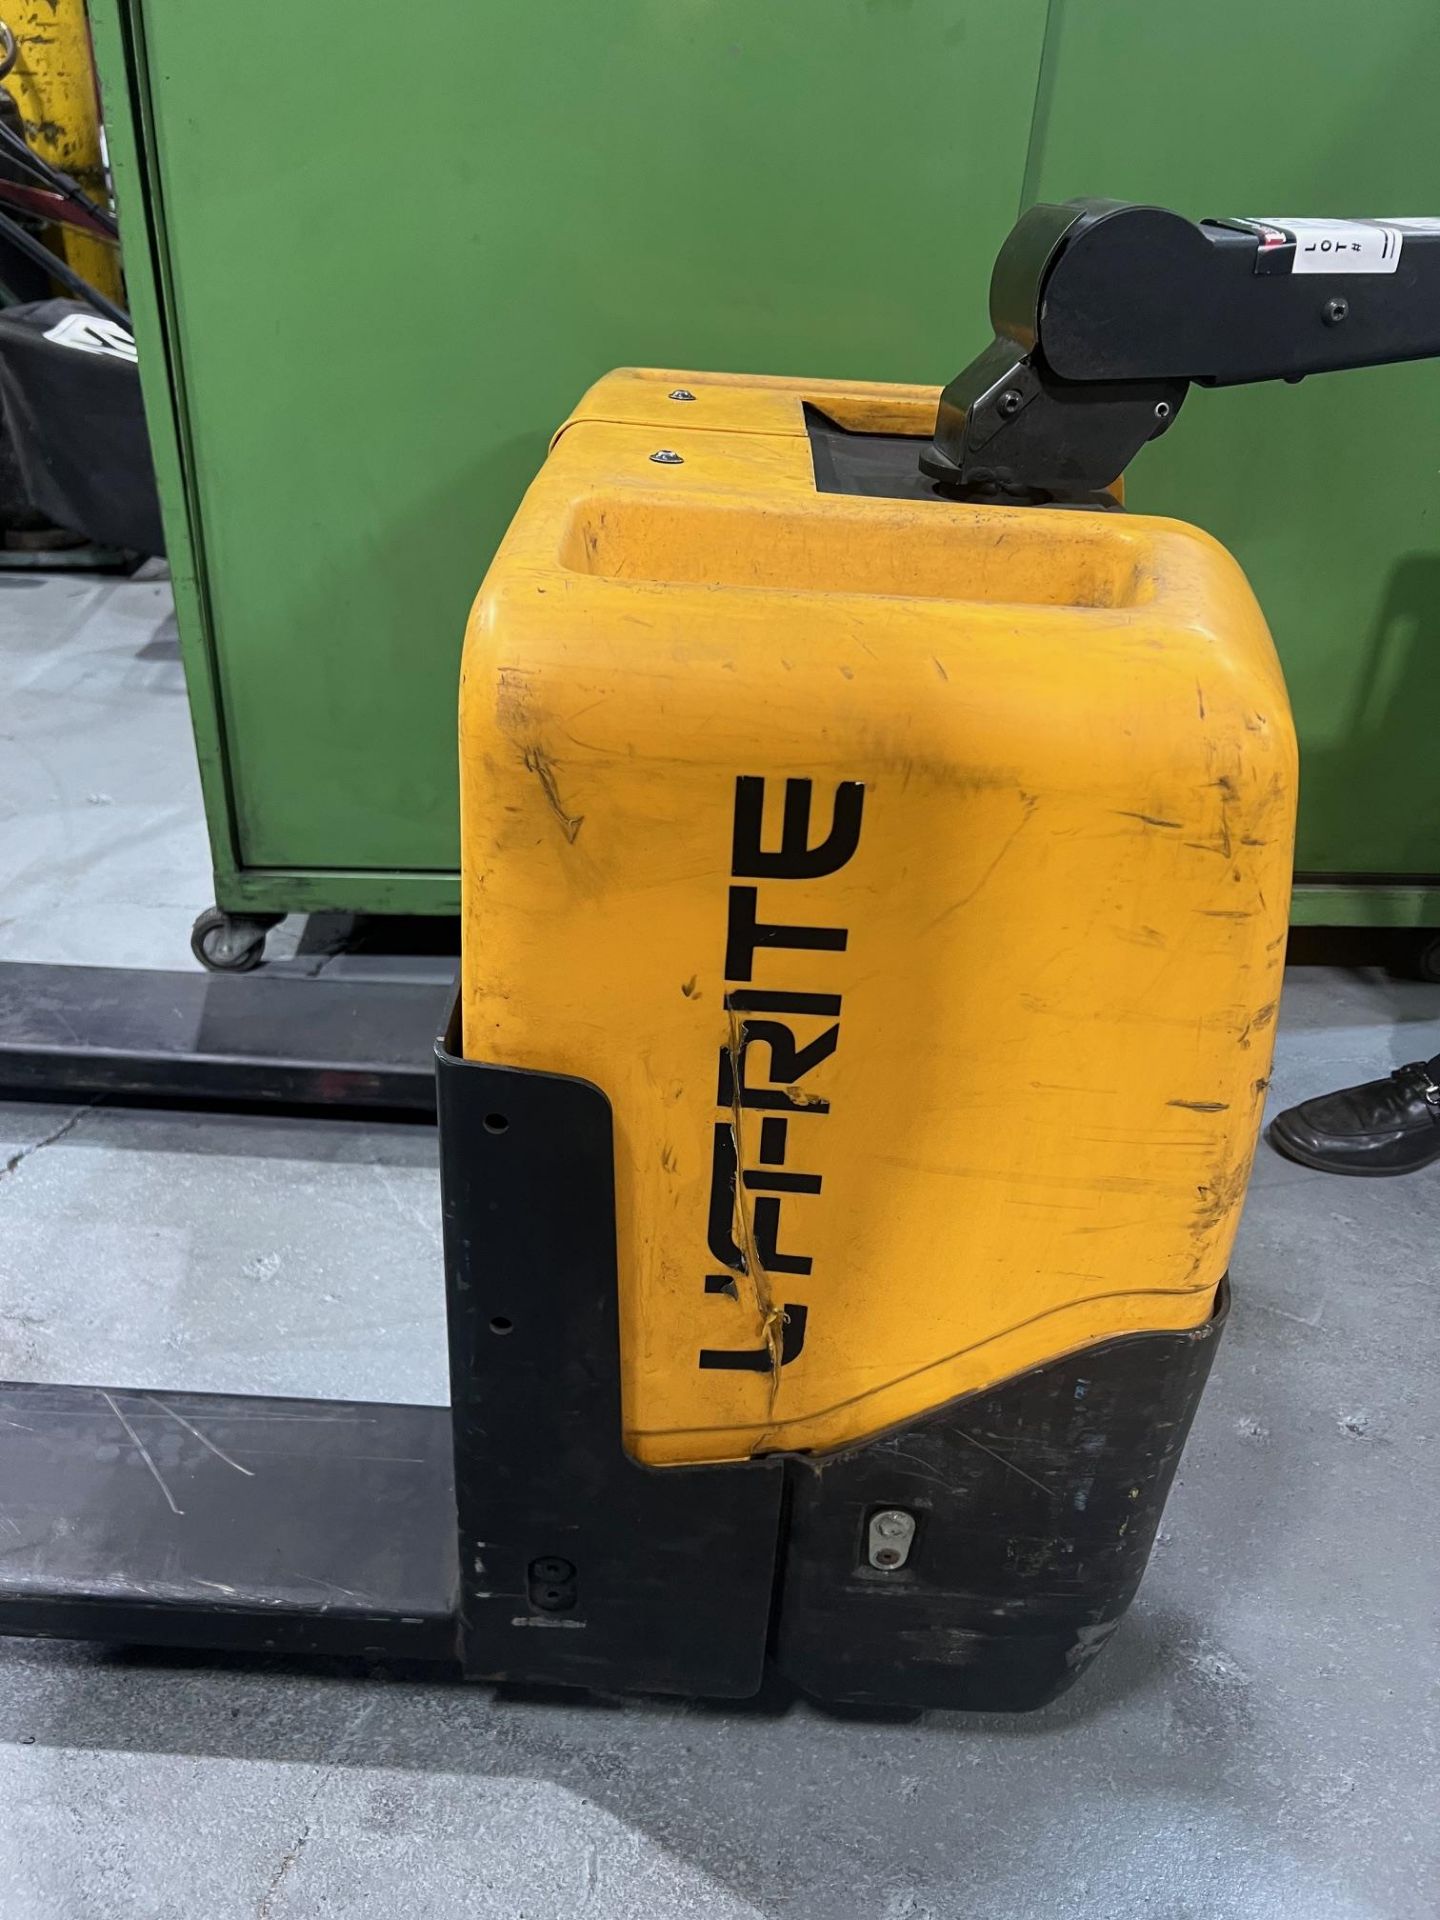 LIFTRITE MOBILE LIFT TRUCK, MODEL -LET 1300, RATED TO LIFT 1300 KG (2600 LBS)